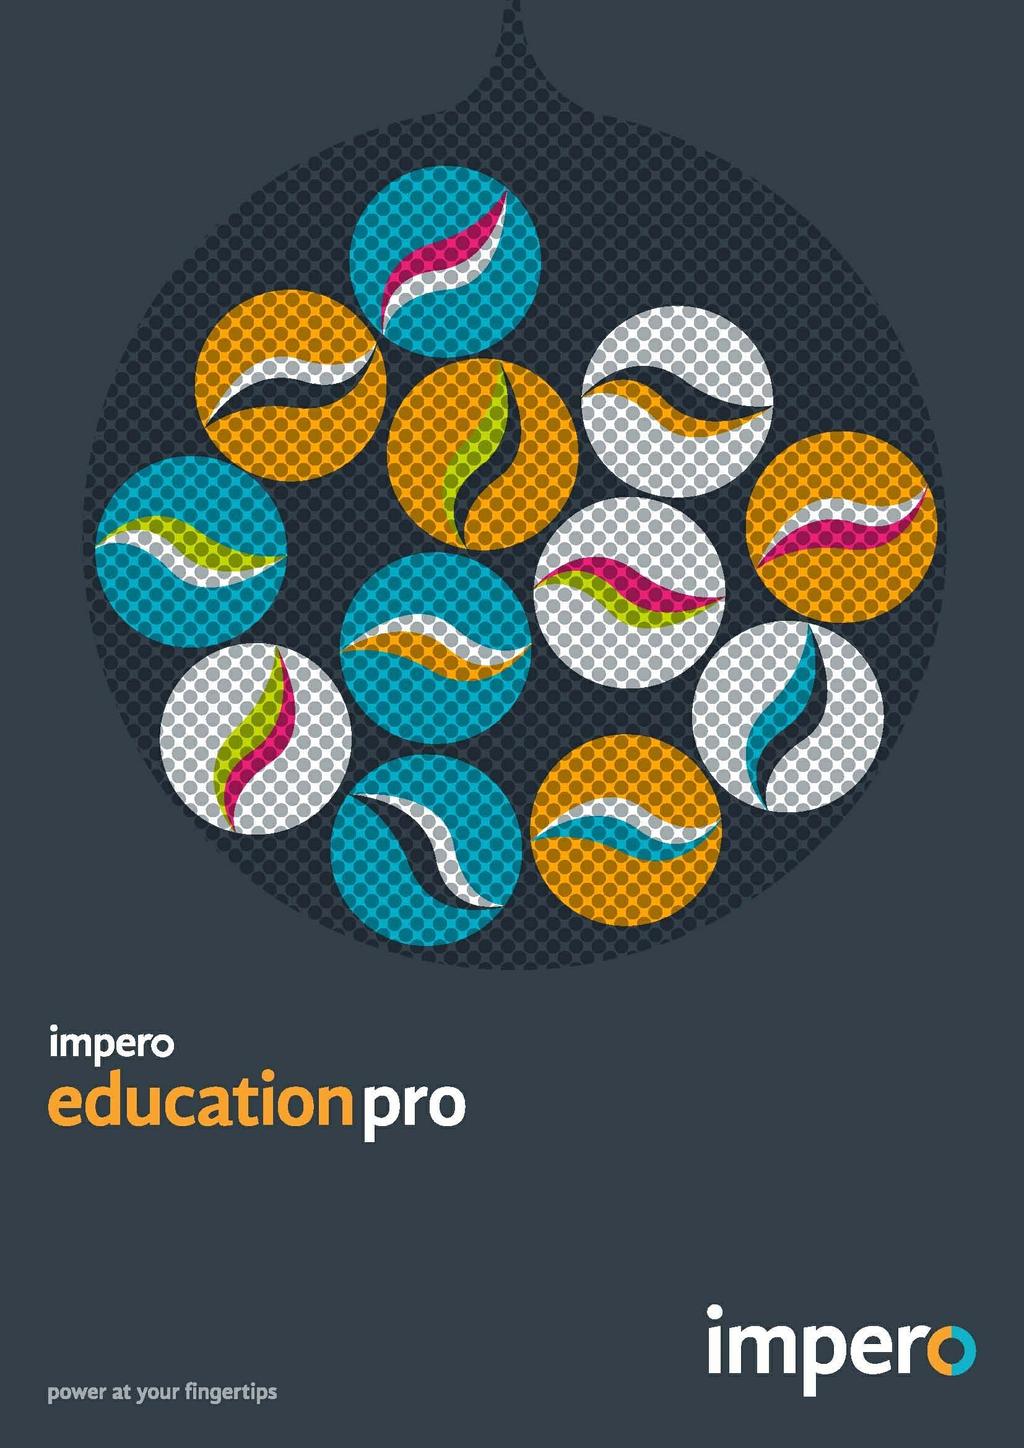 Impero learning series